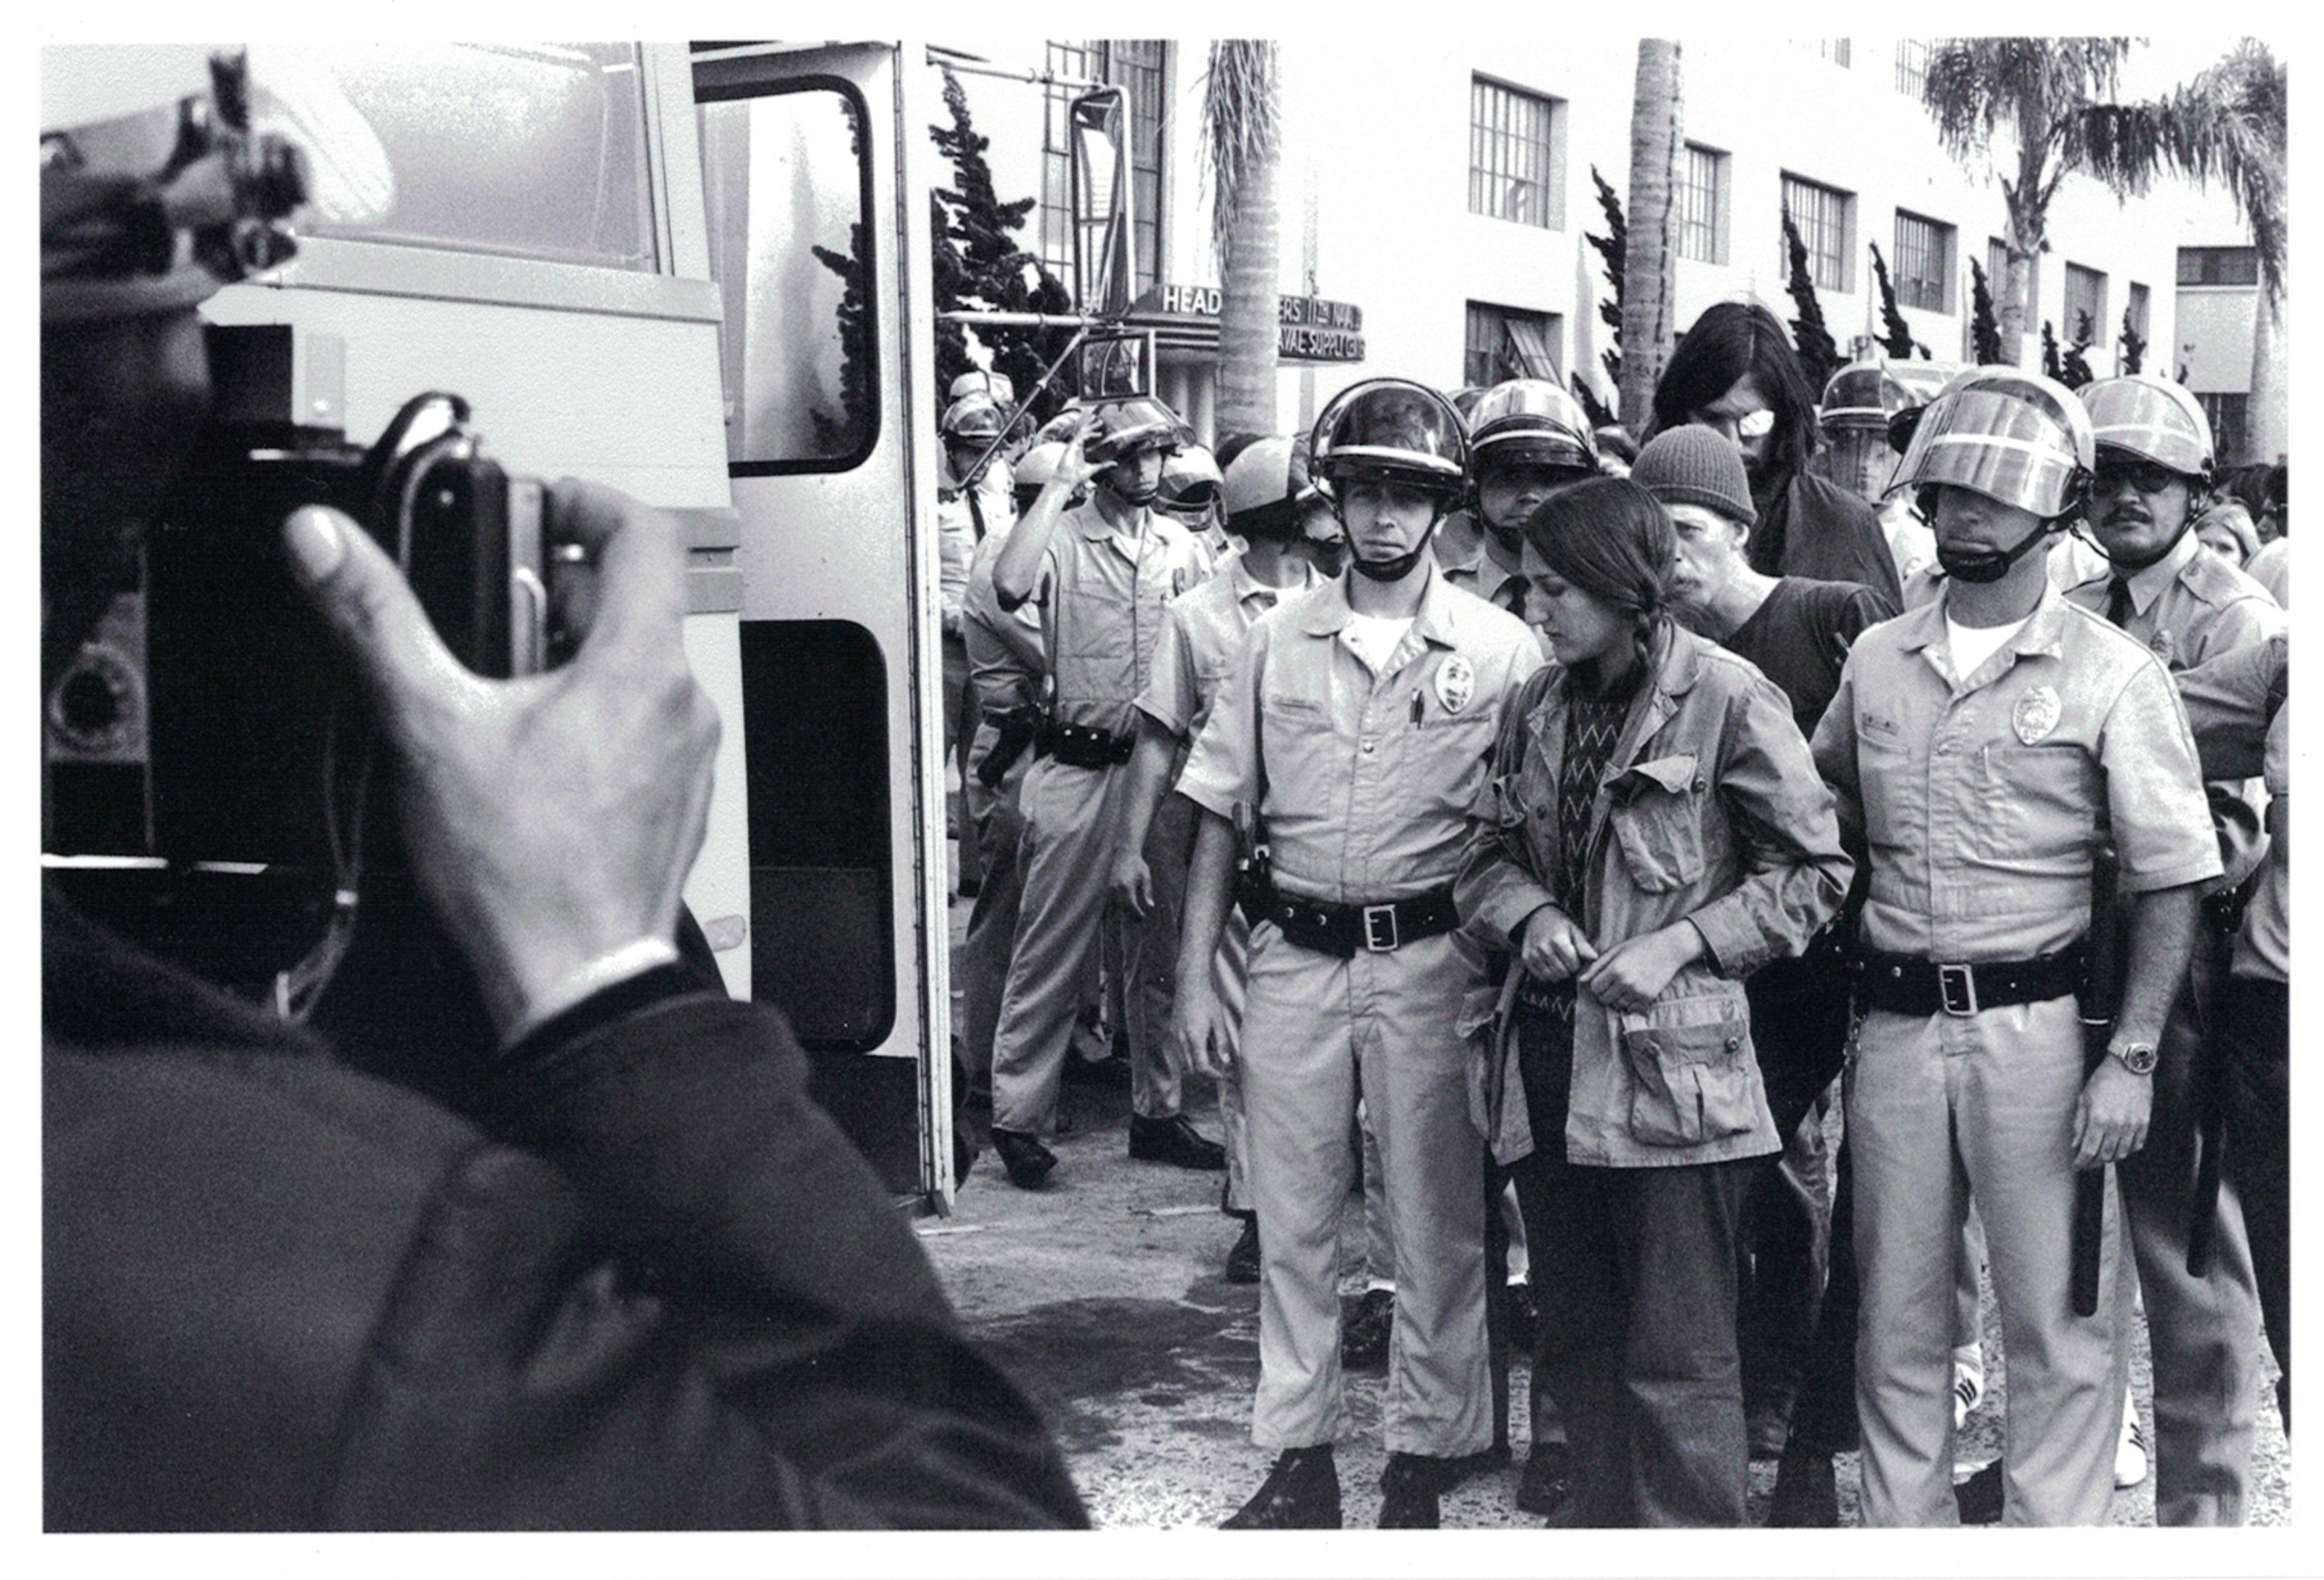 Photograph of a woman getting arrested in a Vietnam rally, next to a police van